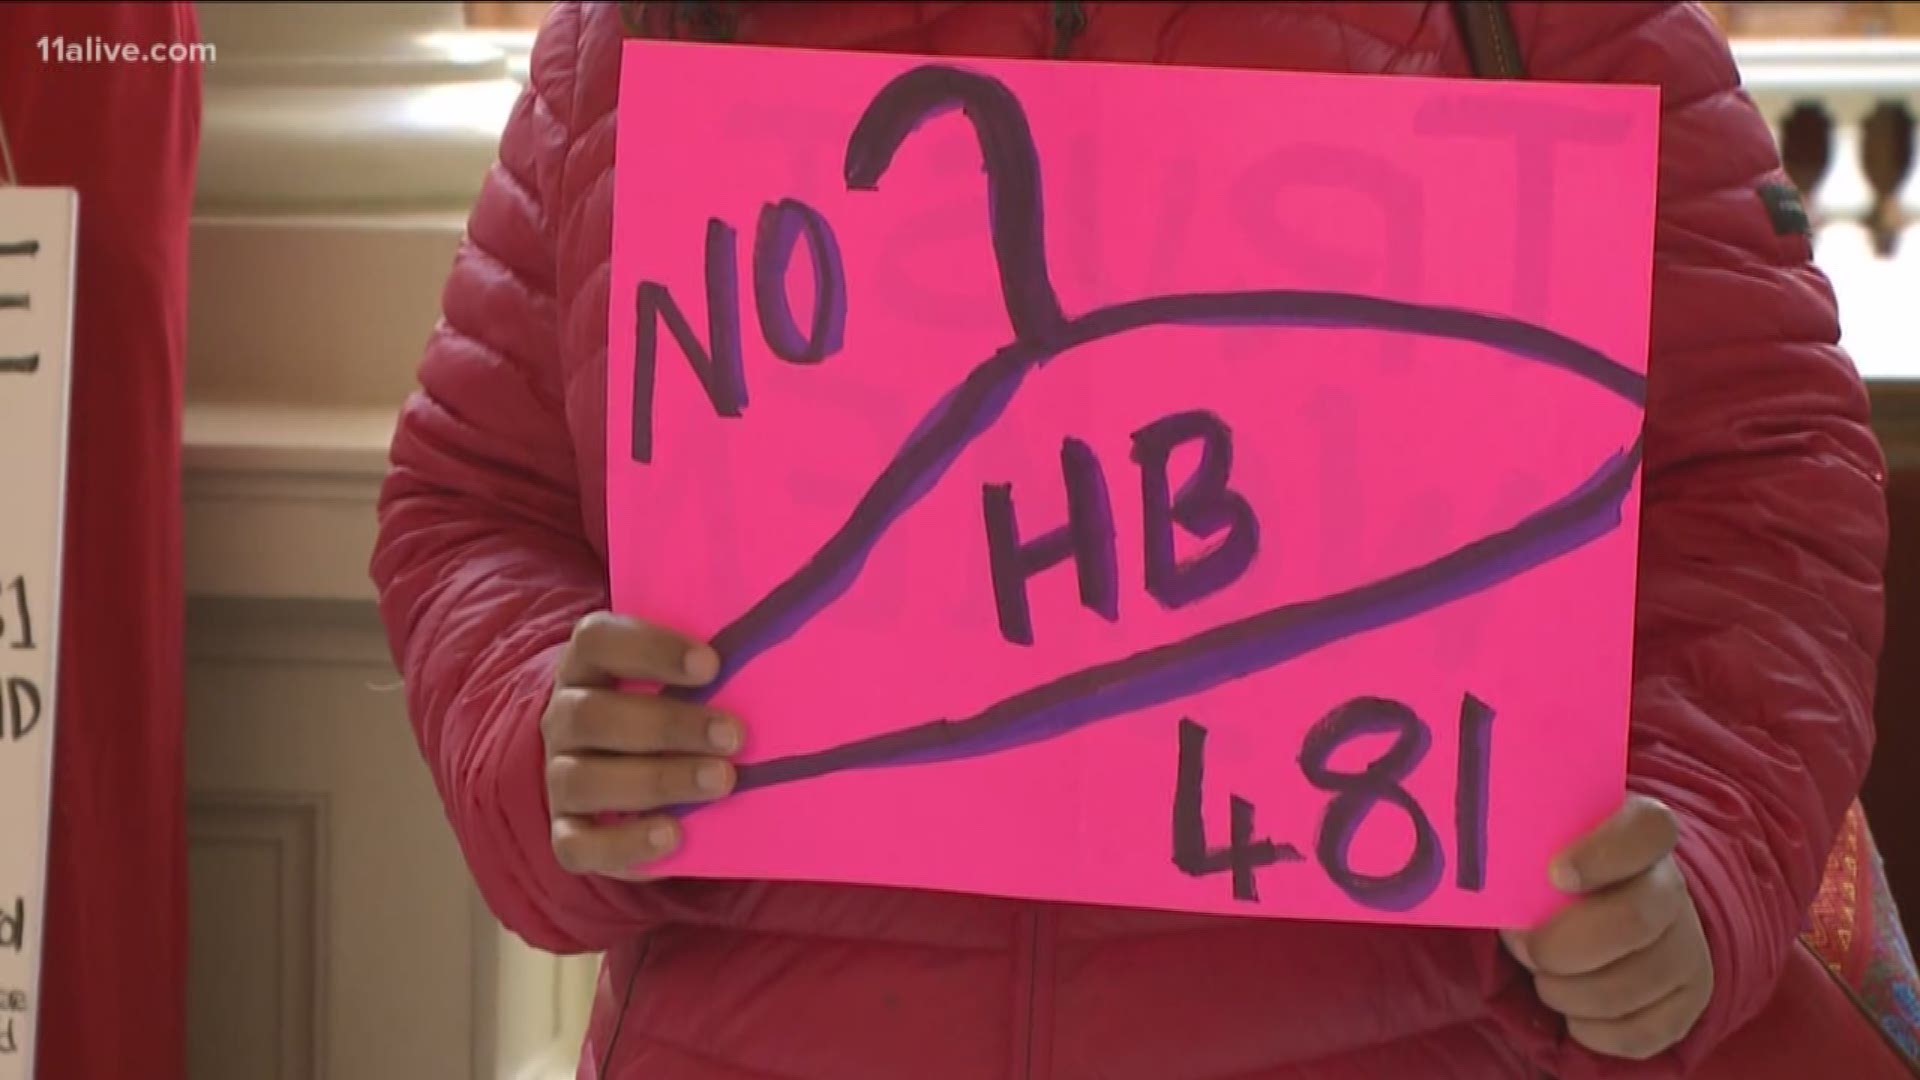 The controversy continues surrounding House Bill 481.